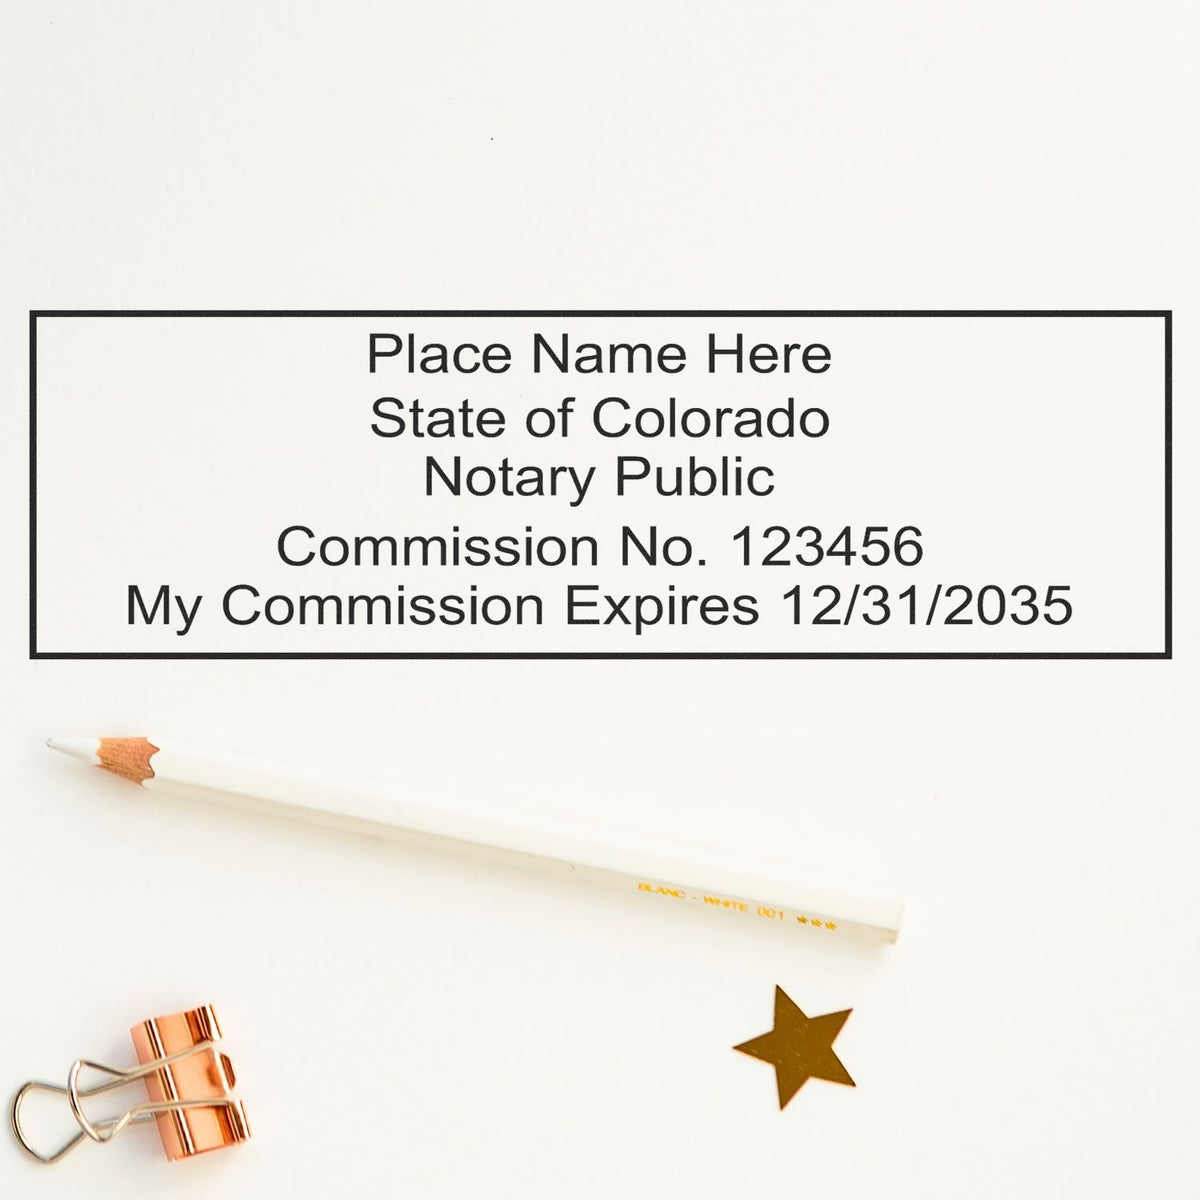 A photograph of the Wooden Handle Colorado Rectangular Notary Public Stamp stamp impression reveals a vivid, professional image of the on paper.